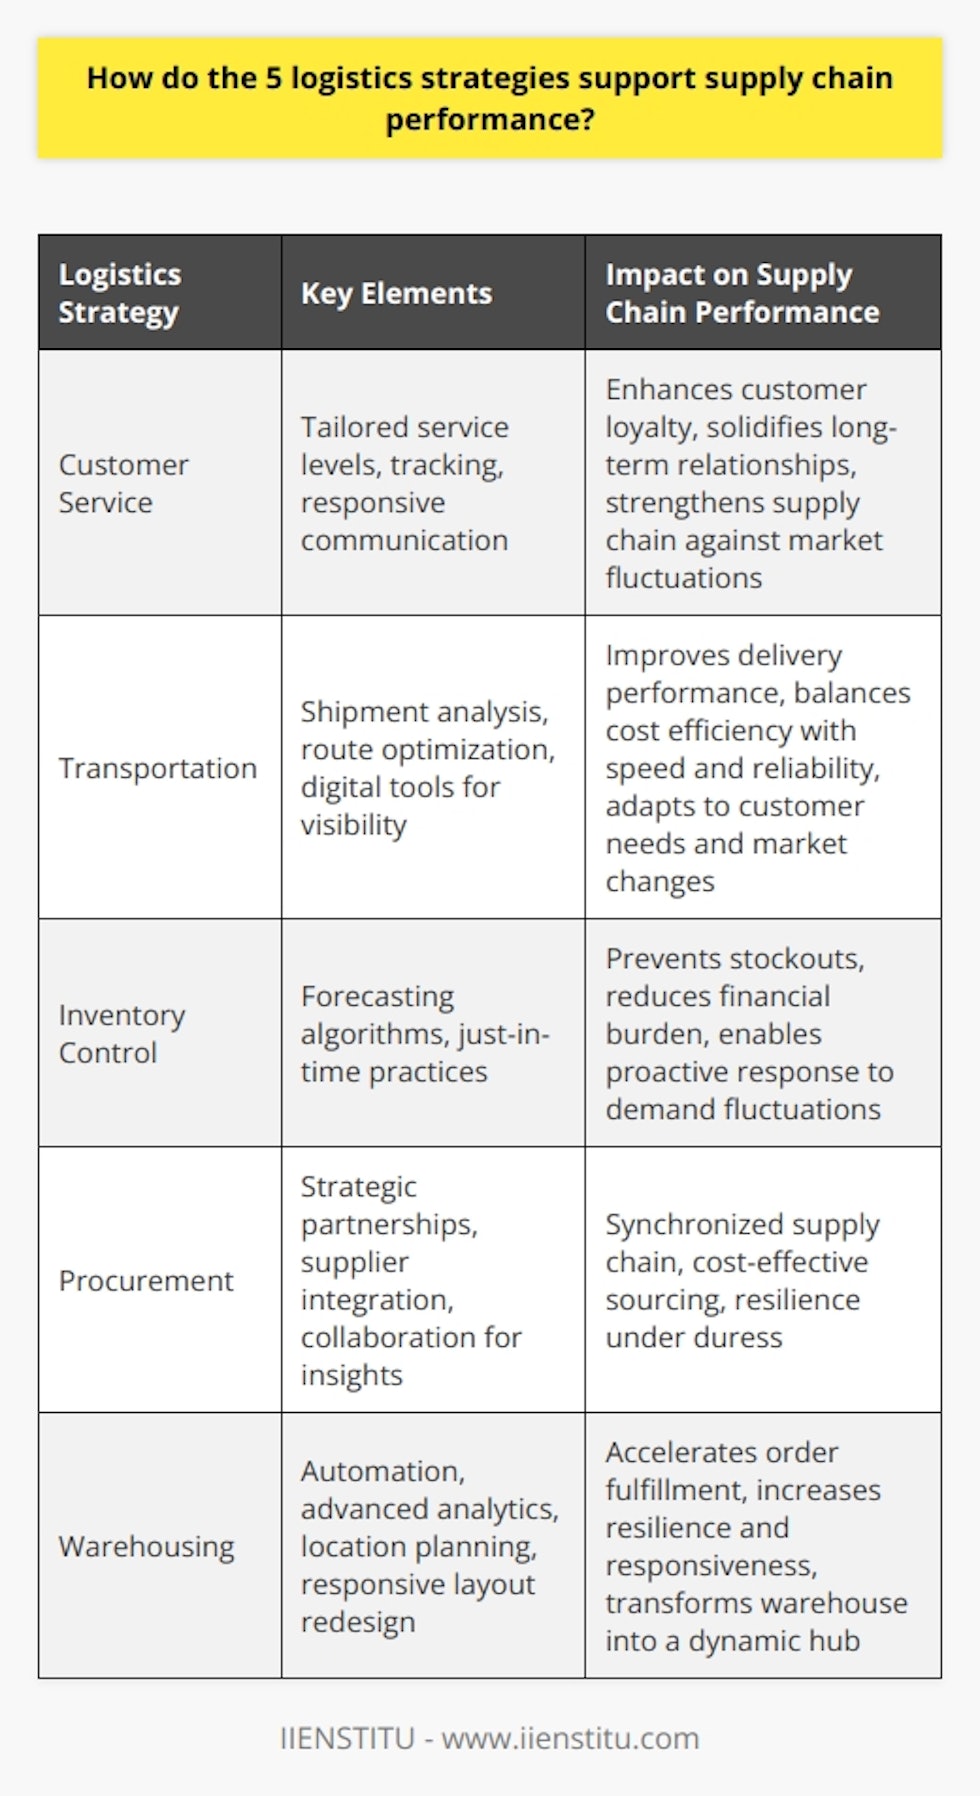 The synergy between the five core logistics strategies - customer service, transportation, inventory control, procurement, and warehousing - is essential for bolstering supply chain efficiency and responsiveness. Let's explore each of these components in detail.Customer Service as a Strategic AssetThe perception of logistics has evolved, with customer service emerging as a strategic asset in enhancing supply chain performance. By prioritizing customer needs through tailored service levels, tracking capabilities, and responsive communication, businesses build long-term relationships that fortify the supply chain against market fluctuations. This approach necessitates a deep comprehension of diverse customer segments, enabling the development of service models that are agile enough to adjust to changing expectations, thereby solidifying customer loyalty and encouraging repeat engagements.Transportation: The Lifeline of LogisticsTransportation serves as logistics' lifeline, orchestrating the physical flow of goods across the supply chain. A robust transportation strategy not only focuses on cost efficiency but also on achieving the right balance between speed, reliability, and flexibility. By analyzing shipment patterns and modal shifts, optimizing route planning, and embracing digital tools for real-time visibility, organizations can enhance delivery performance. A multifaceted transportation strategy is then capable of navigating complex trade-offs, ensuring that adapting to customer needs or market changes doesn't compromise operational efficiency.Inventory Control: The Fine BalanceThe prowess of a supply chain is often gauged by its inventory control mechanisms. Achieving a fine balance that prevents stockouts while avoiding excessive capital tie-up is crucial. Sophisticated forecasting algorithms and just-in-time practices reduce the financial burden of inventory, making room for a proactive approach to demand fluctuations. Such precision-calibrated inventory control not only ensures product availability but also contributes to a leaner, more robust supply chain that can weather the uncertainties of supply and demand with confidence.Procurement: The Strategic Partnership ApproachProcurement transcends traditional buy-sell transactions, evolving into a strategic partnership that fortifies the supply chain. By forging strong alliances with key suppliers and integrating them into the planning process, businesses can achieve a more synchronized supply chain. These collaborations enable sharper insights into material availability, potential bottlenecks, and cost-saving opportunities. When procurement strategies are aligned with overall supply chain goals, the result is a resilient and cost-effective sourcing mechanism that supports performance even under duress.Warehousing: Innovation and IntelligenceThe warehousing strategy, when executed with innovation and intelligence, can serve as a pivotal force in the supply chain. Technological advancements such as automation and advanced analytics have transformed warehousing from a static storage space to a dynamic hub that actively manages throughput. Through strategic location planning, responsive layout redesign, and smart inventory placement, warehousing can dramatically accelerate order fulfillment and bolster the entire supply chain's resilience and responsiveness.By integrating these five essential logistics strategies into a coherent framework, organizations can create a supply chain that not only withstands the test of volatile market conditions but thrives amidst them. The ongoing pursuit of excellence in these areas will continue to define the competitive landscape for businesses that are intent on delivering unmatched customer value through superior supply chain performance.